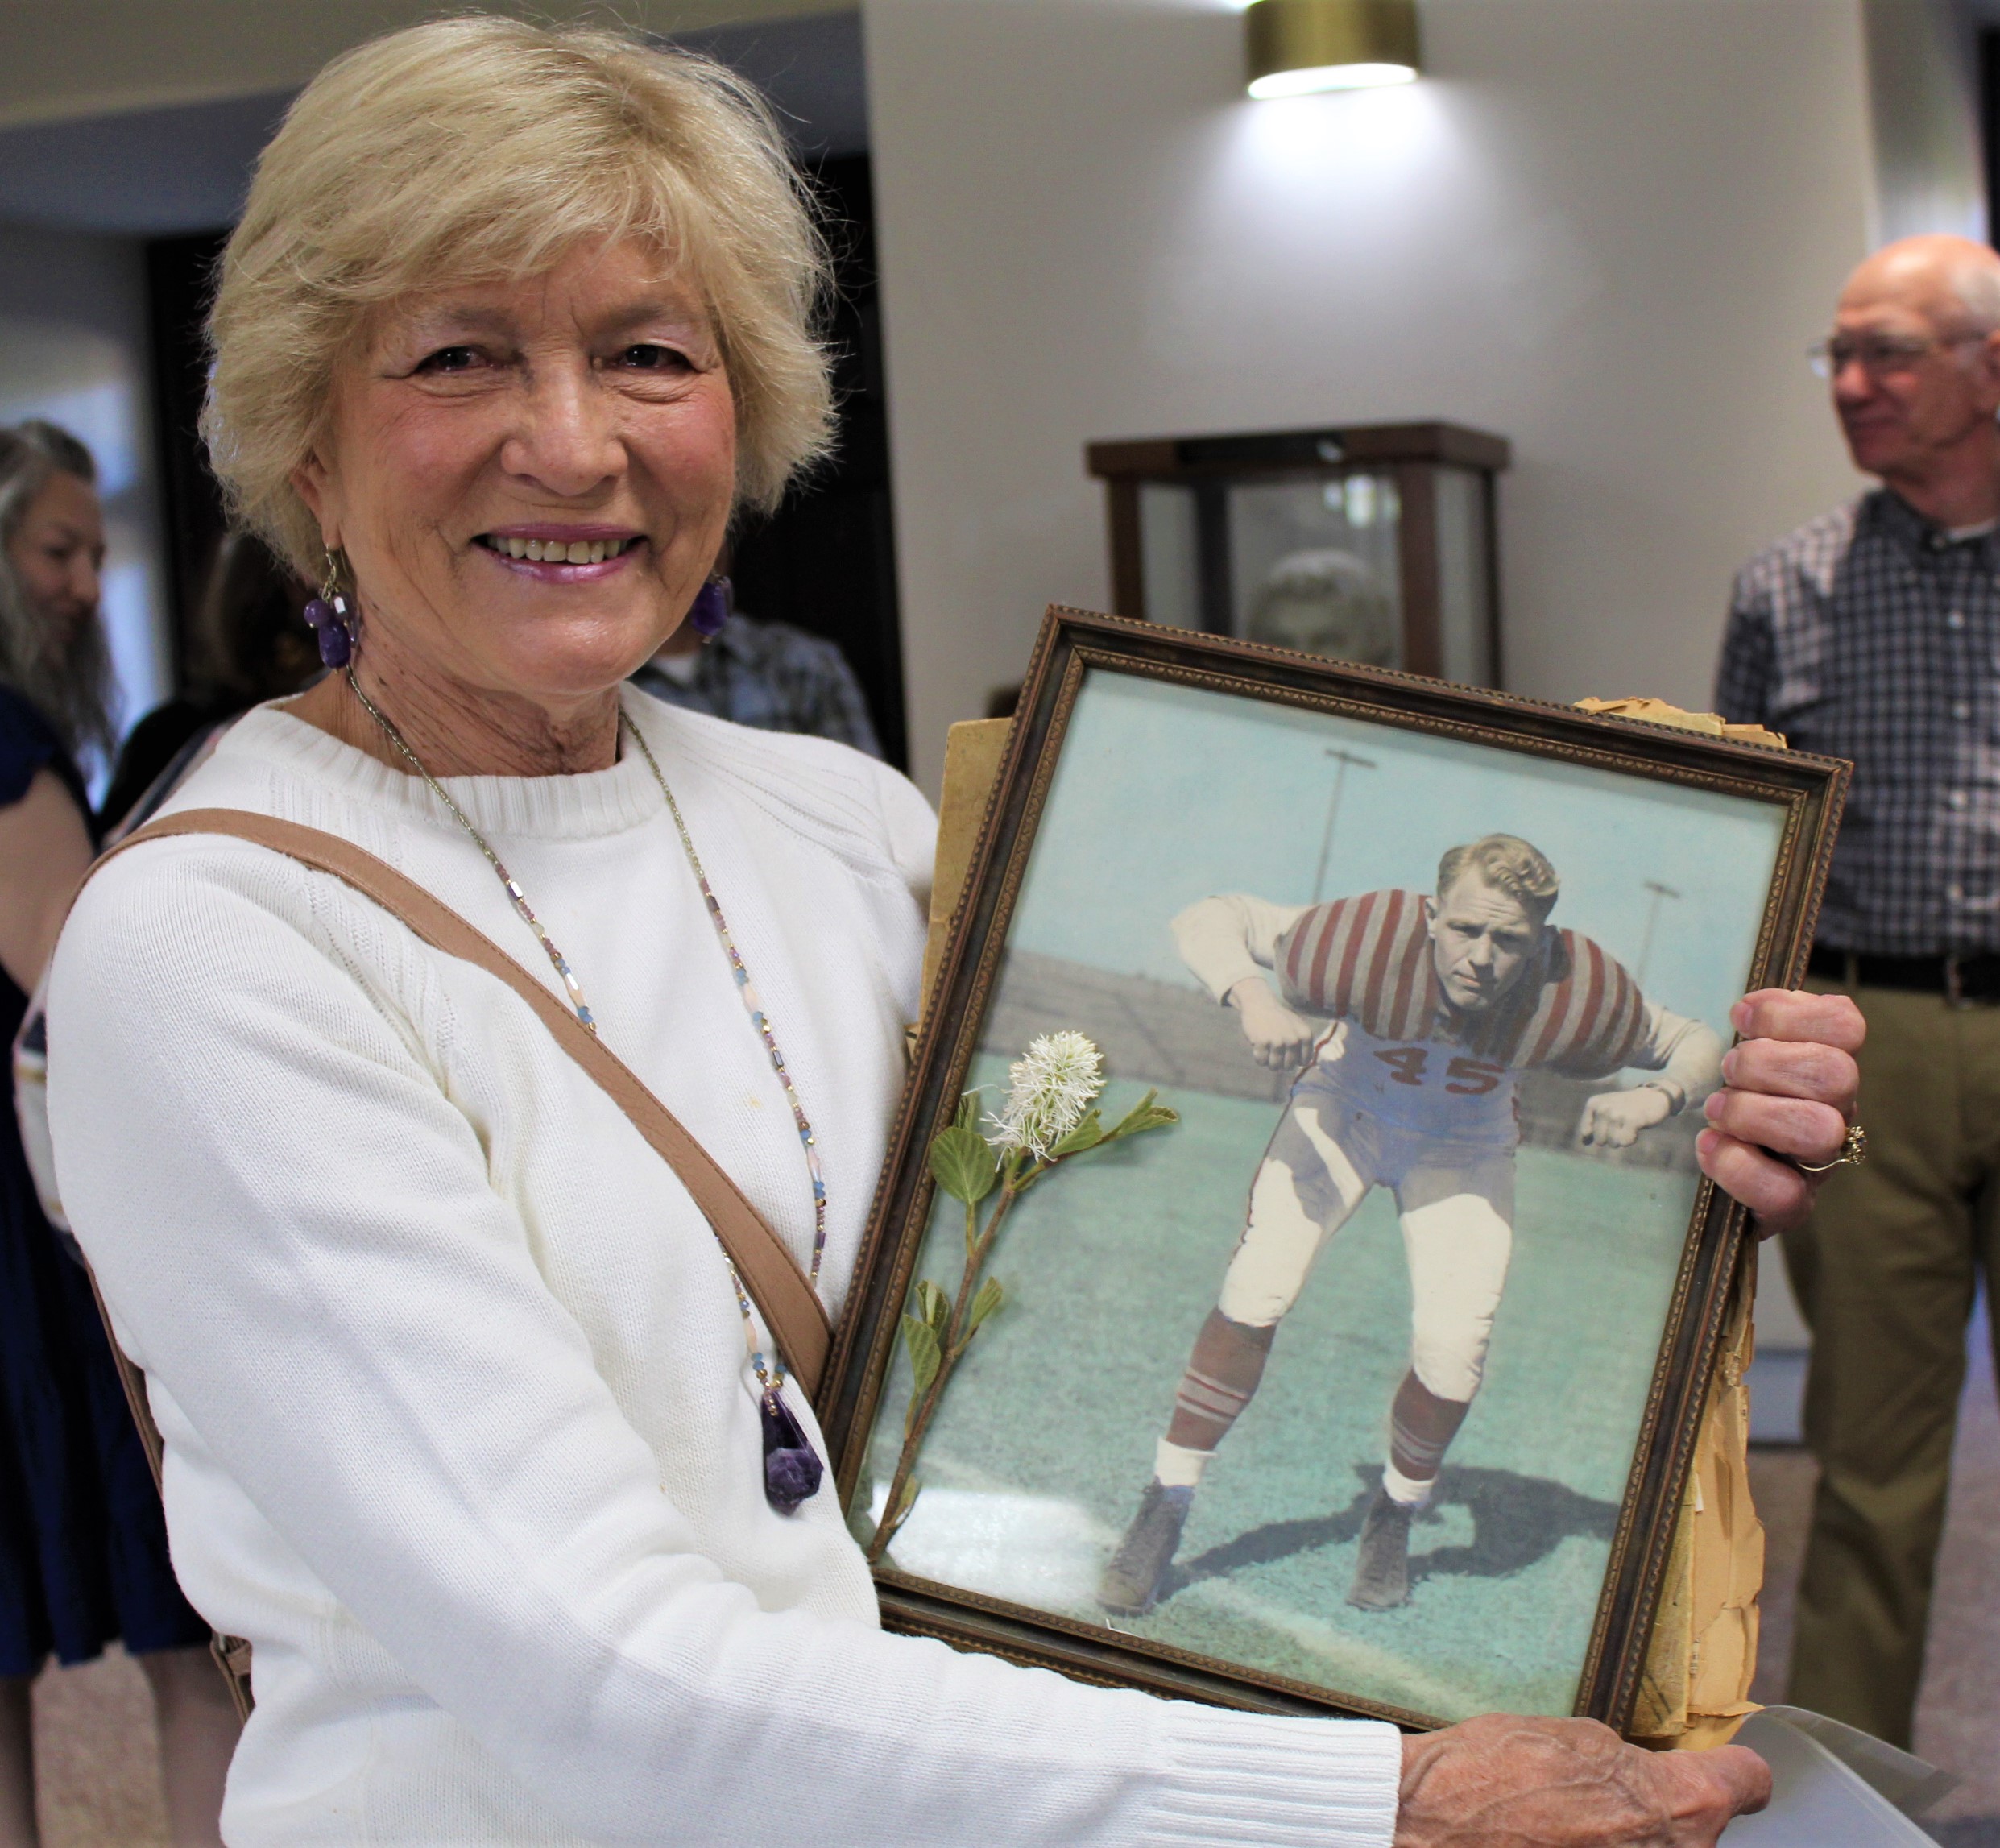 Sandra Corley Bandy with a photo of her father, Buddy Corley, in his football uniform